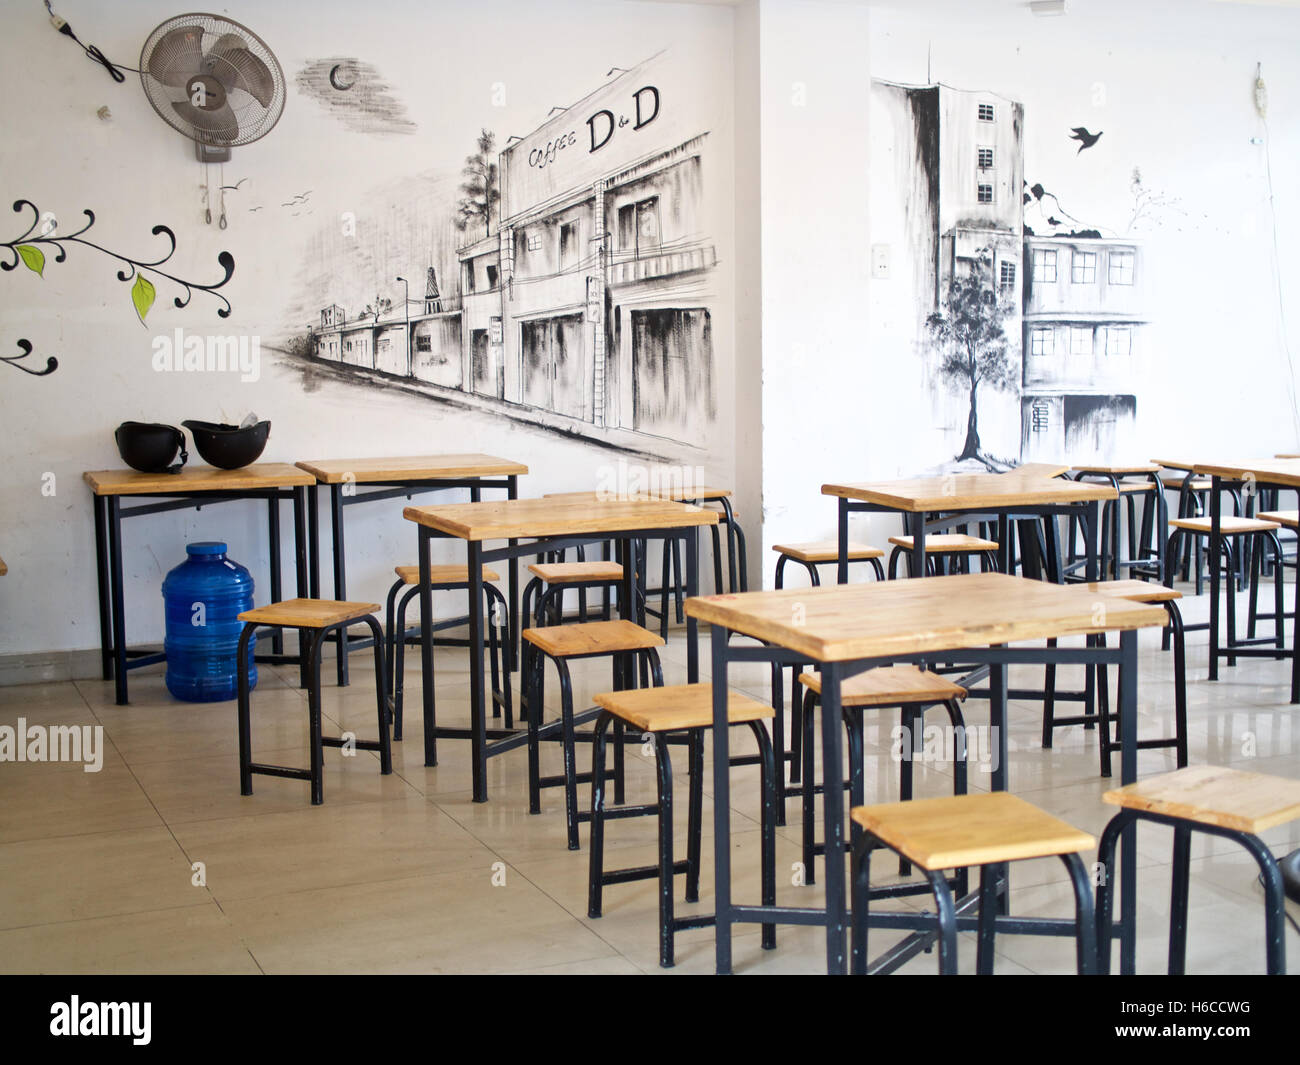 Cafe wall art timbre wooden tables chairs stools Stock Photo